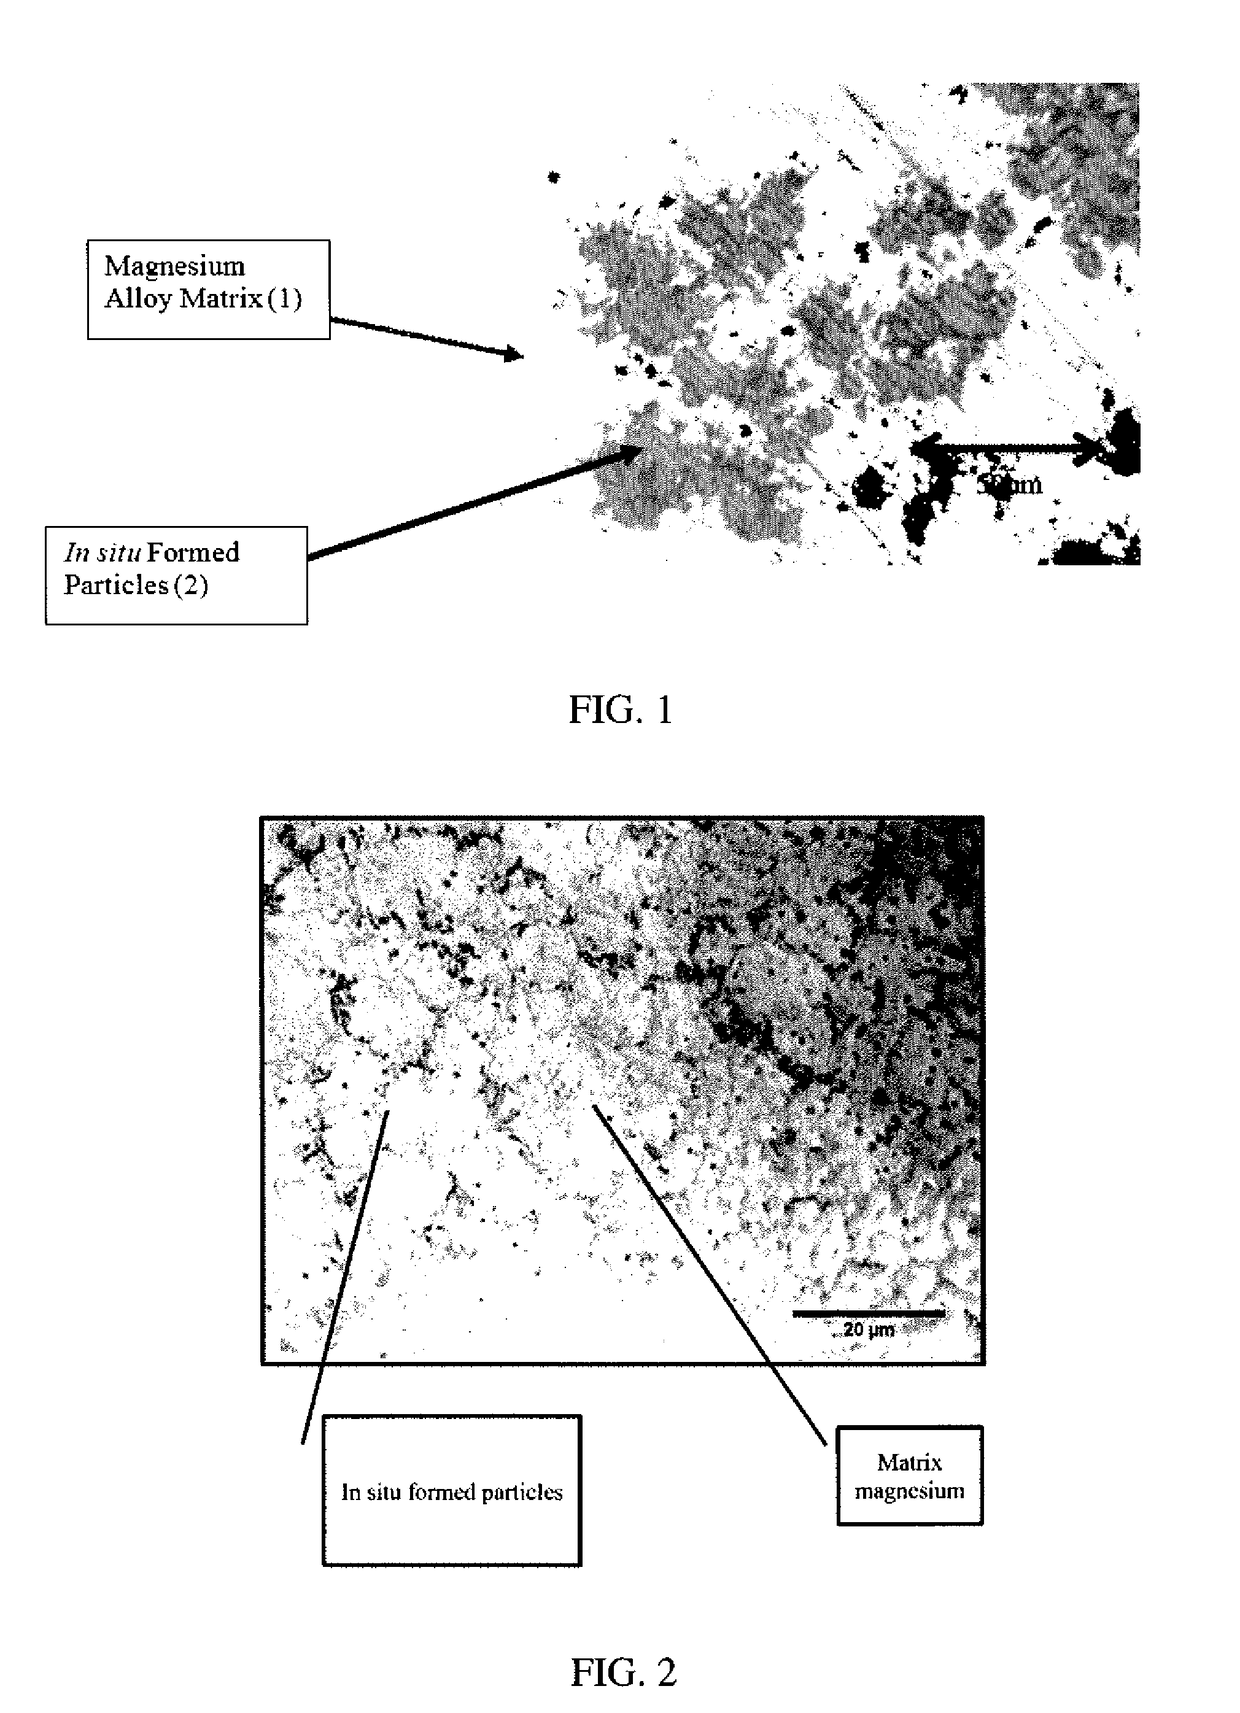 Galvanically-Active In Situ Formed Particles for Controlled Rate Dissolving Tools